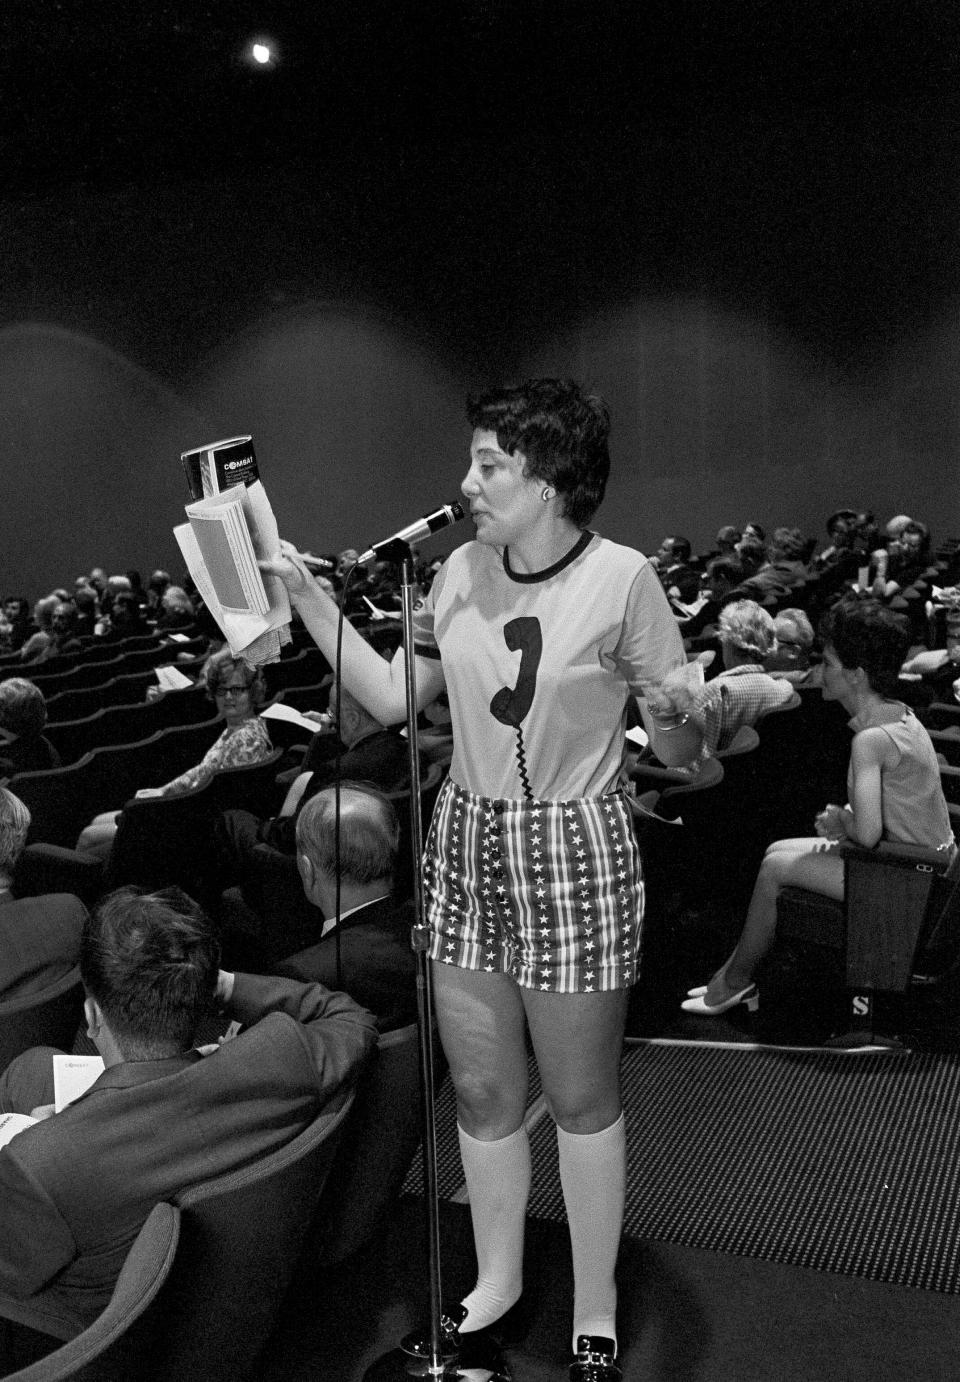 FILE - In this May 11, 1971 file photo, Evelyn Y. Davis wears hotpants as she speaks at the annual stockholders meeting of the Communications Satellite Corp. in Washington. For decades, Davis, who has been buying a few shares of big companies, attends their annual meetings, turning them into her personal stage. But in 2012, Davis didn't show up at any company's annual meeting. Age has finally made her do what the most powerful CEOs in America couldn't: Give it a rest. "I'm not so young anymore," said Mrs. Davis, 82. (AP Photo)